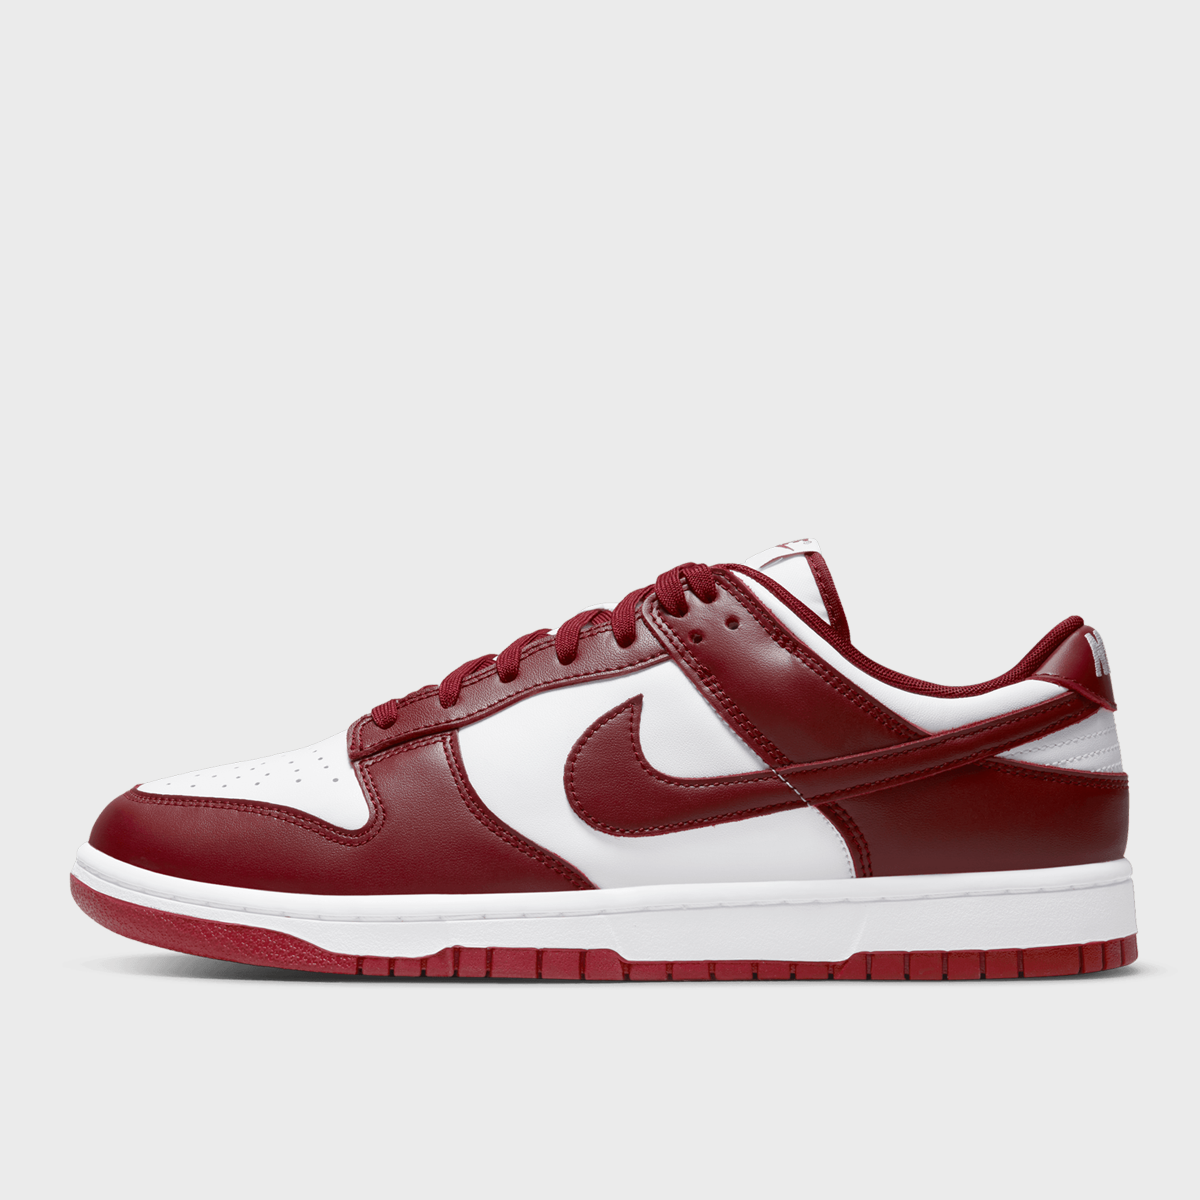 Dunk Low Retro team red/ team red white, NIKE, Footwear, team red/ team red white, taille: 40